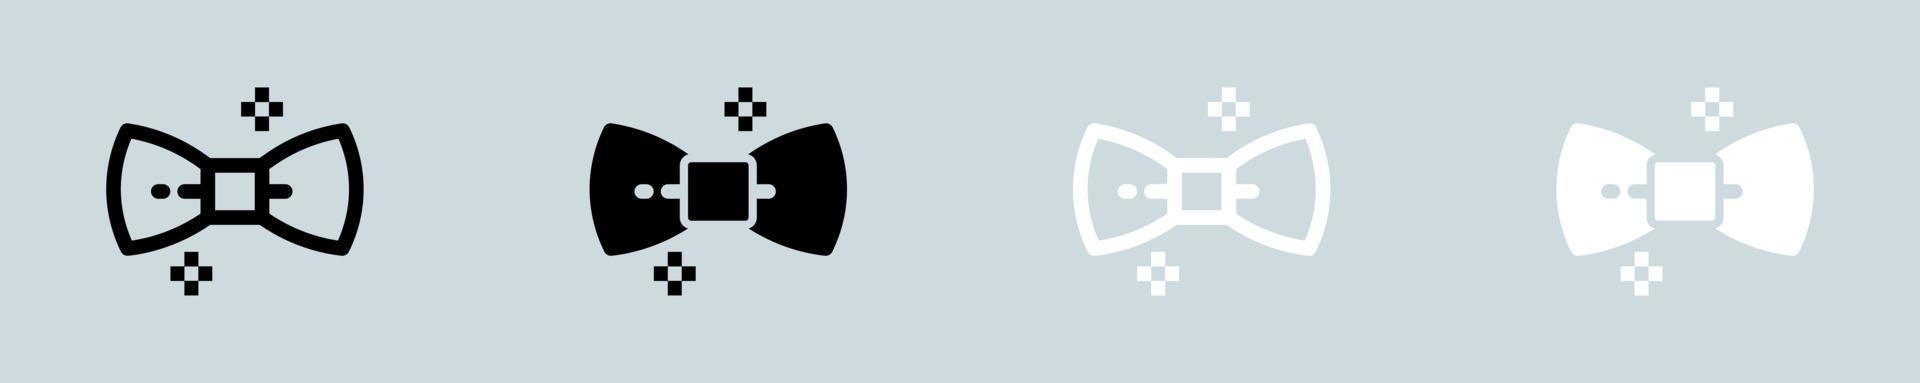 Bowties icon set in black and white. Bow tie signs vector illustration.